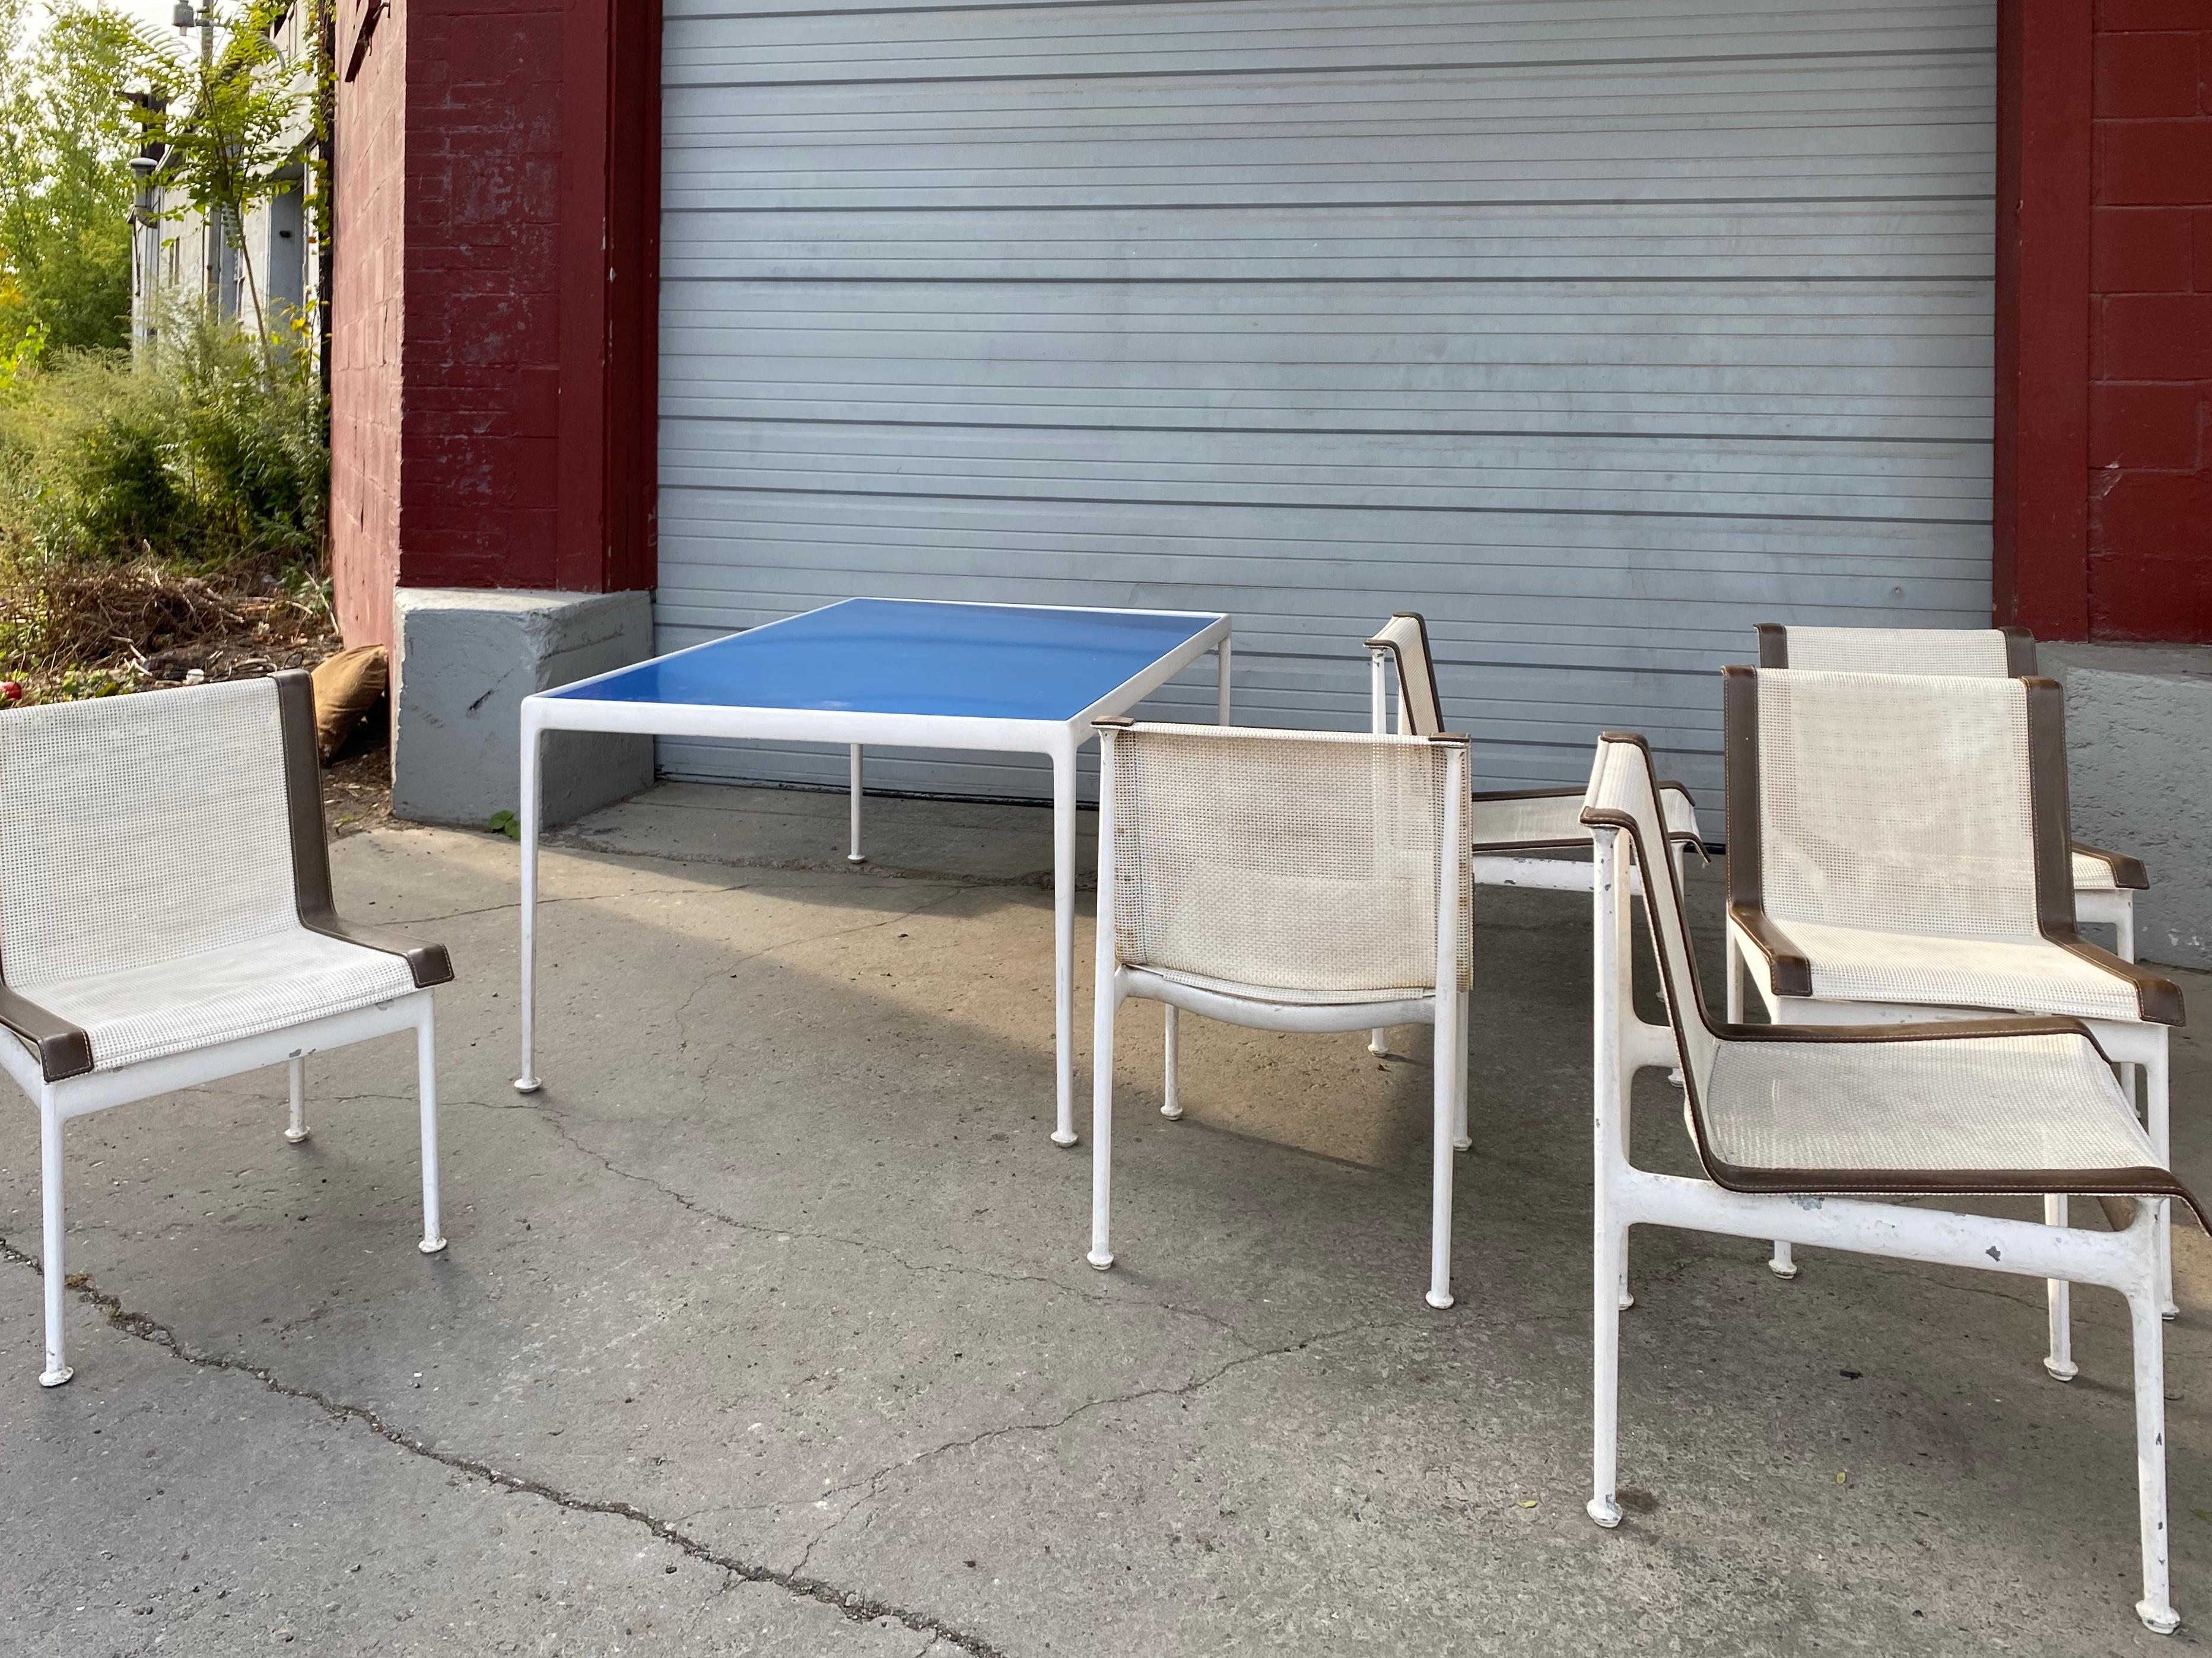 Aluminum Richard Shultz for Knoll Outdoor Dining Set, Blue Enamel Table, 6 Chairs